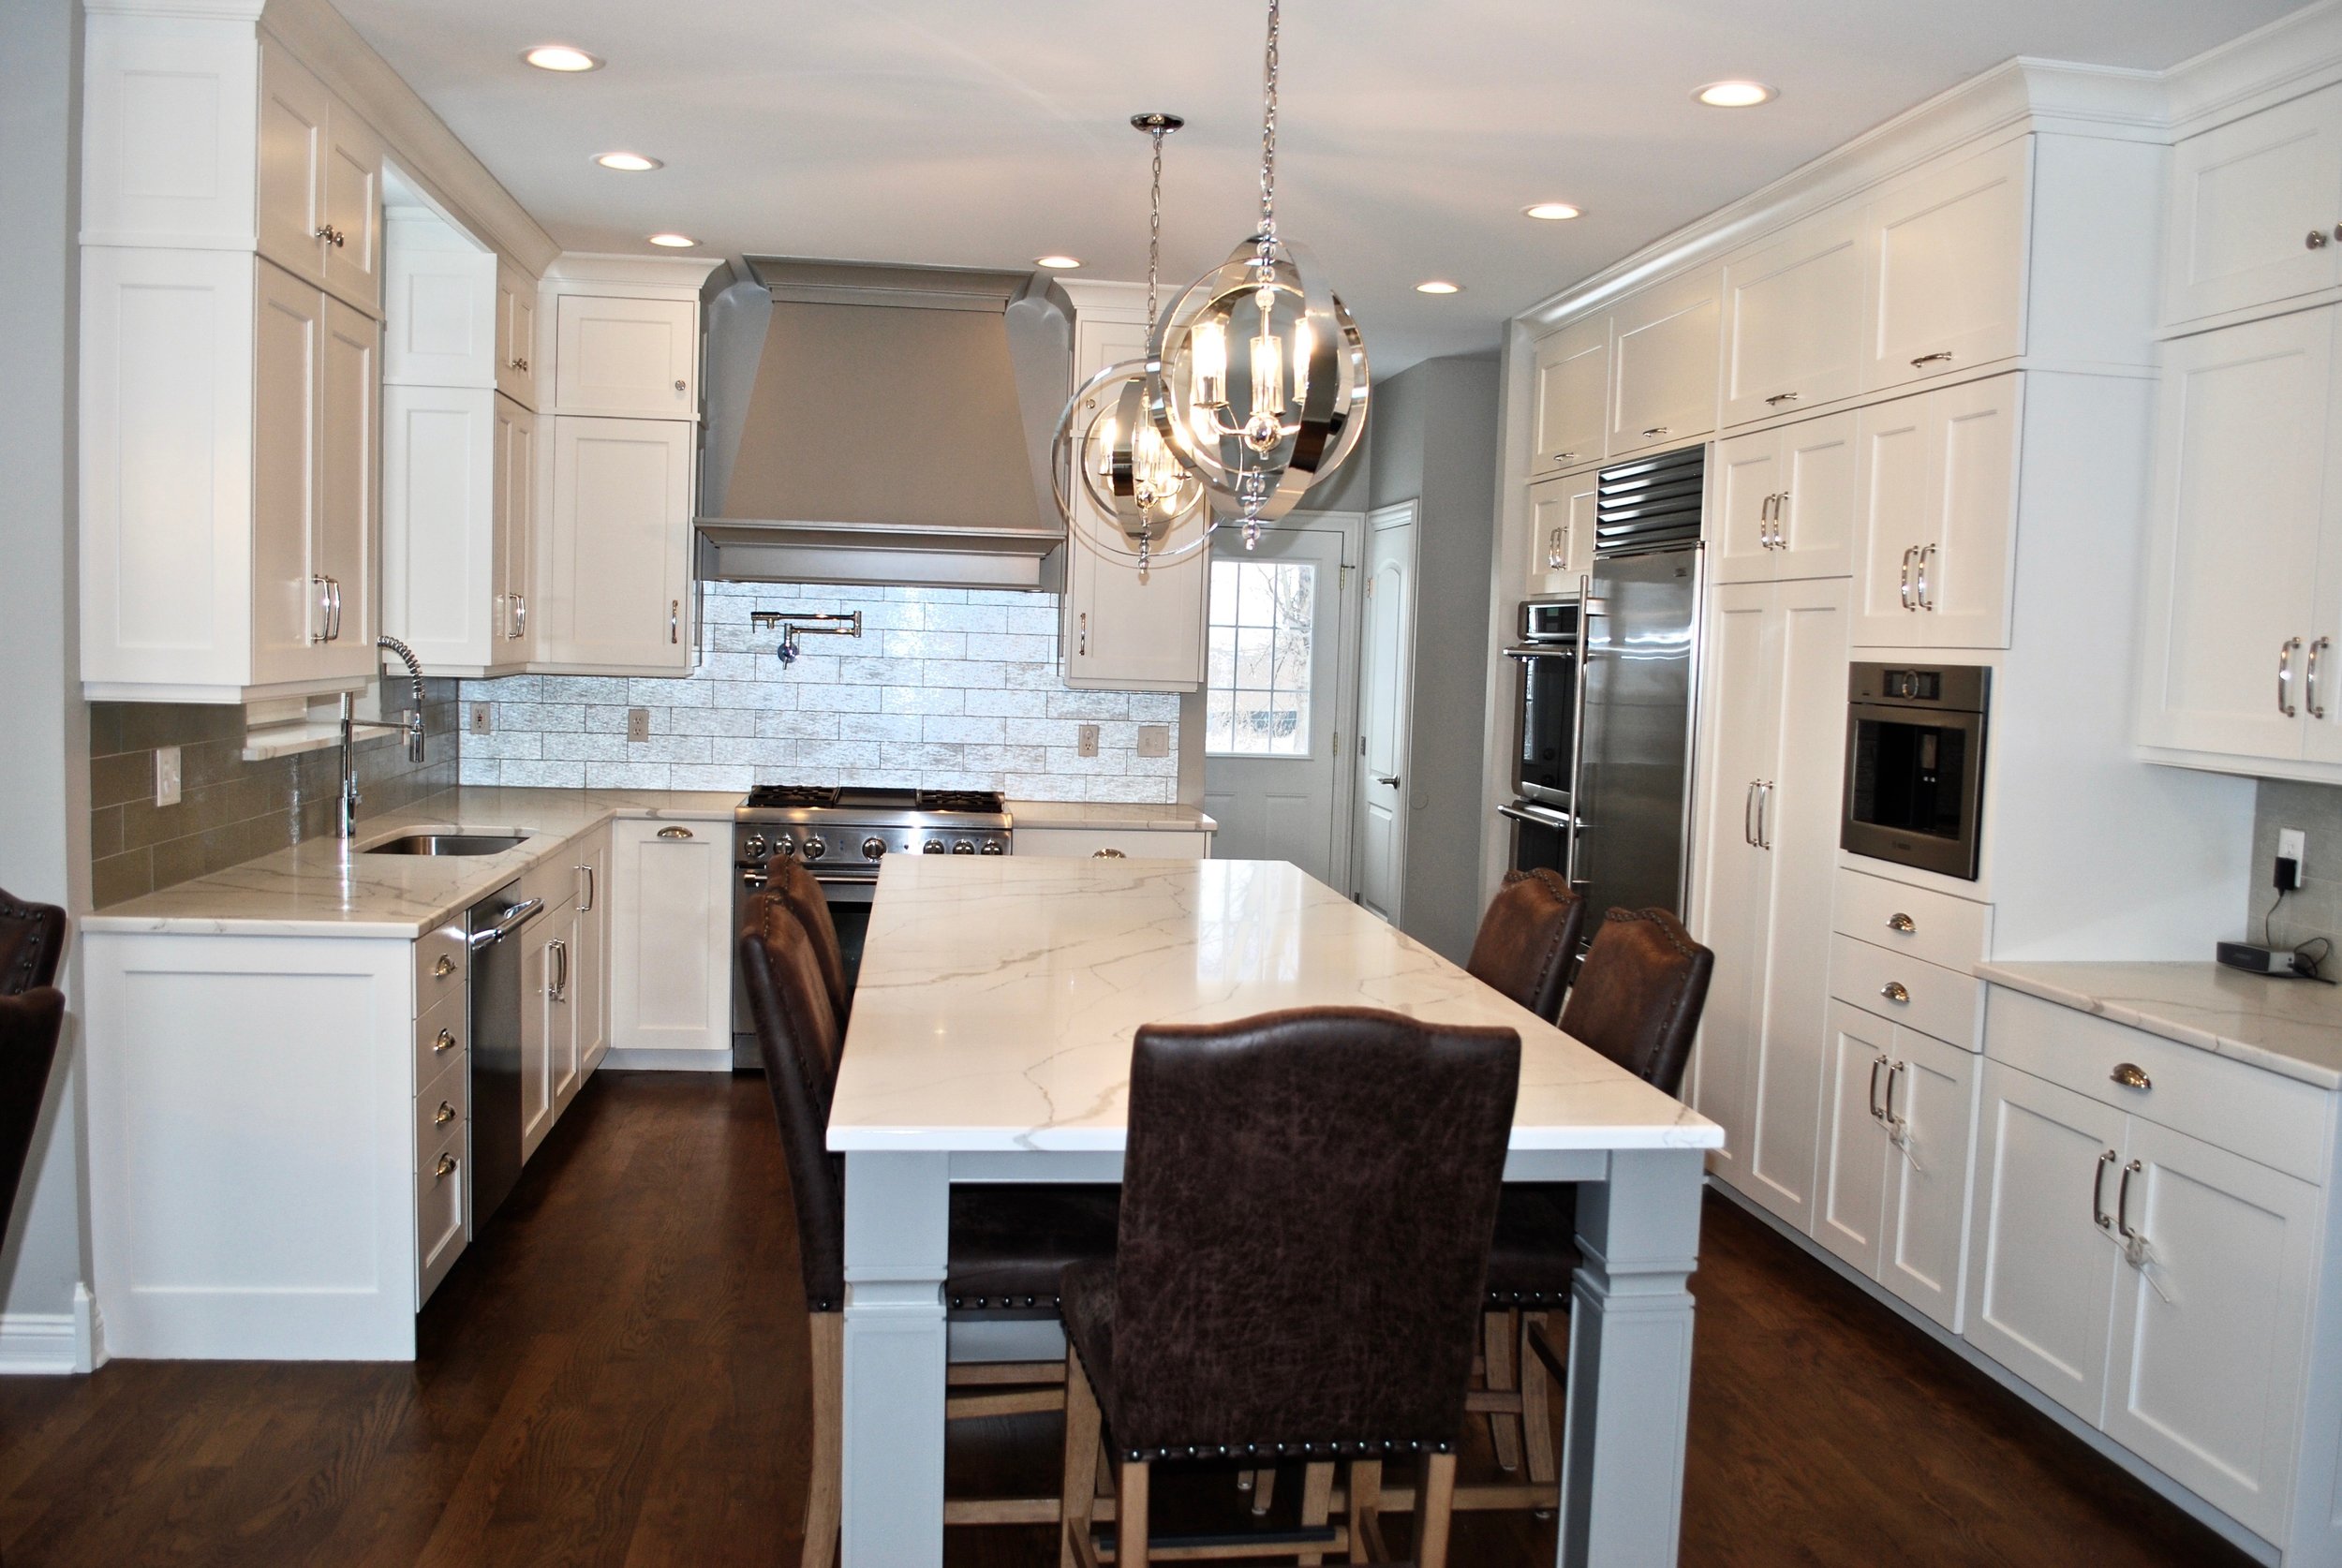 FOX MILL KITCHEN REMODELING